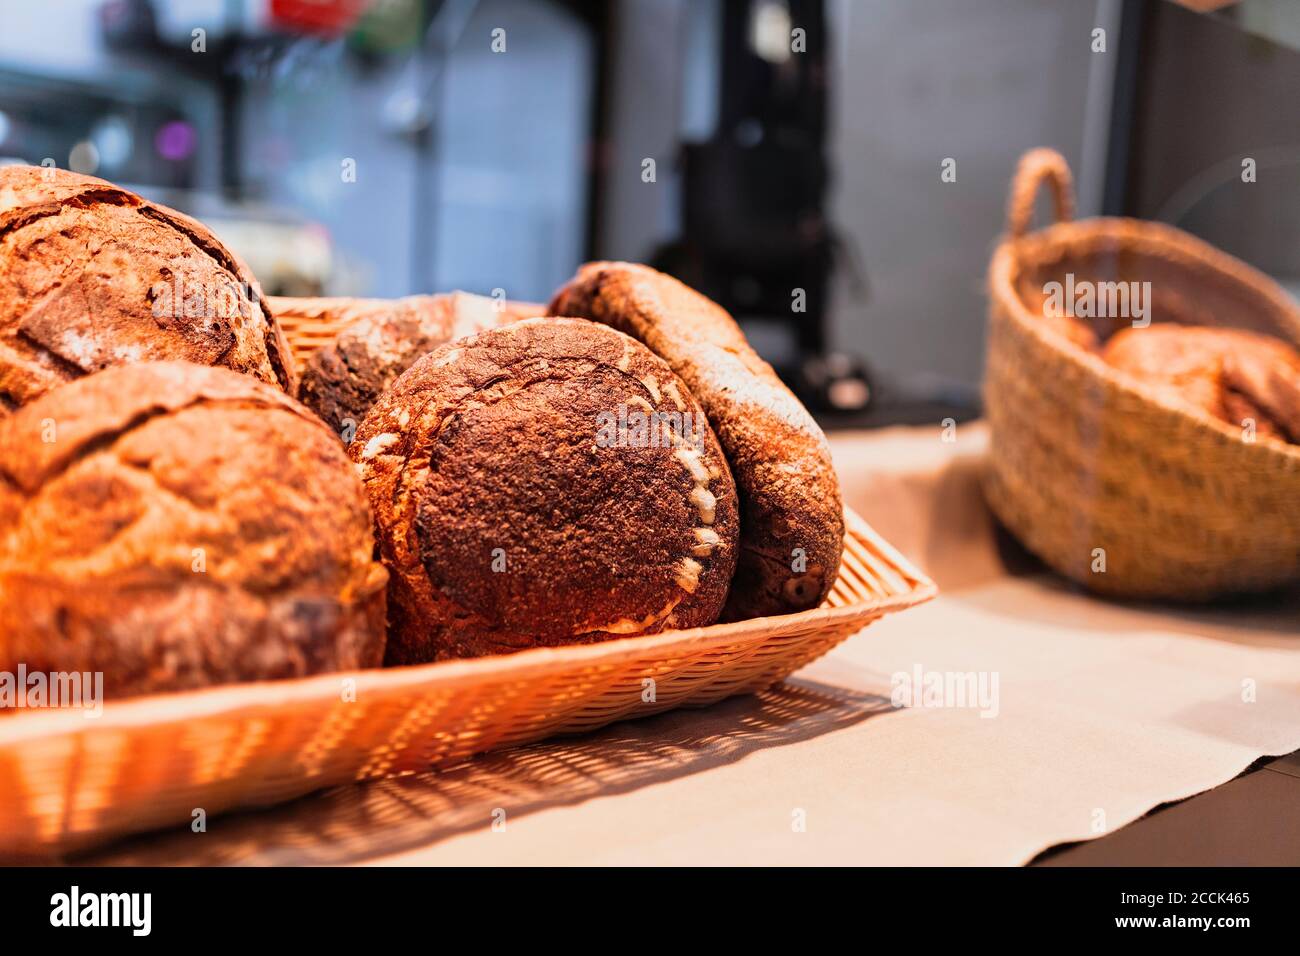 Close-up of baked bread in container over kitchen counter Stock Photo